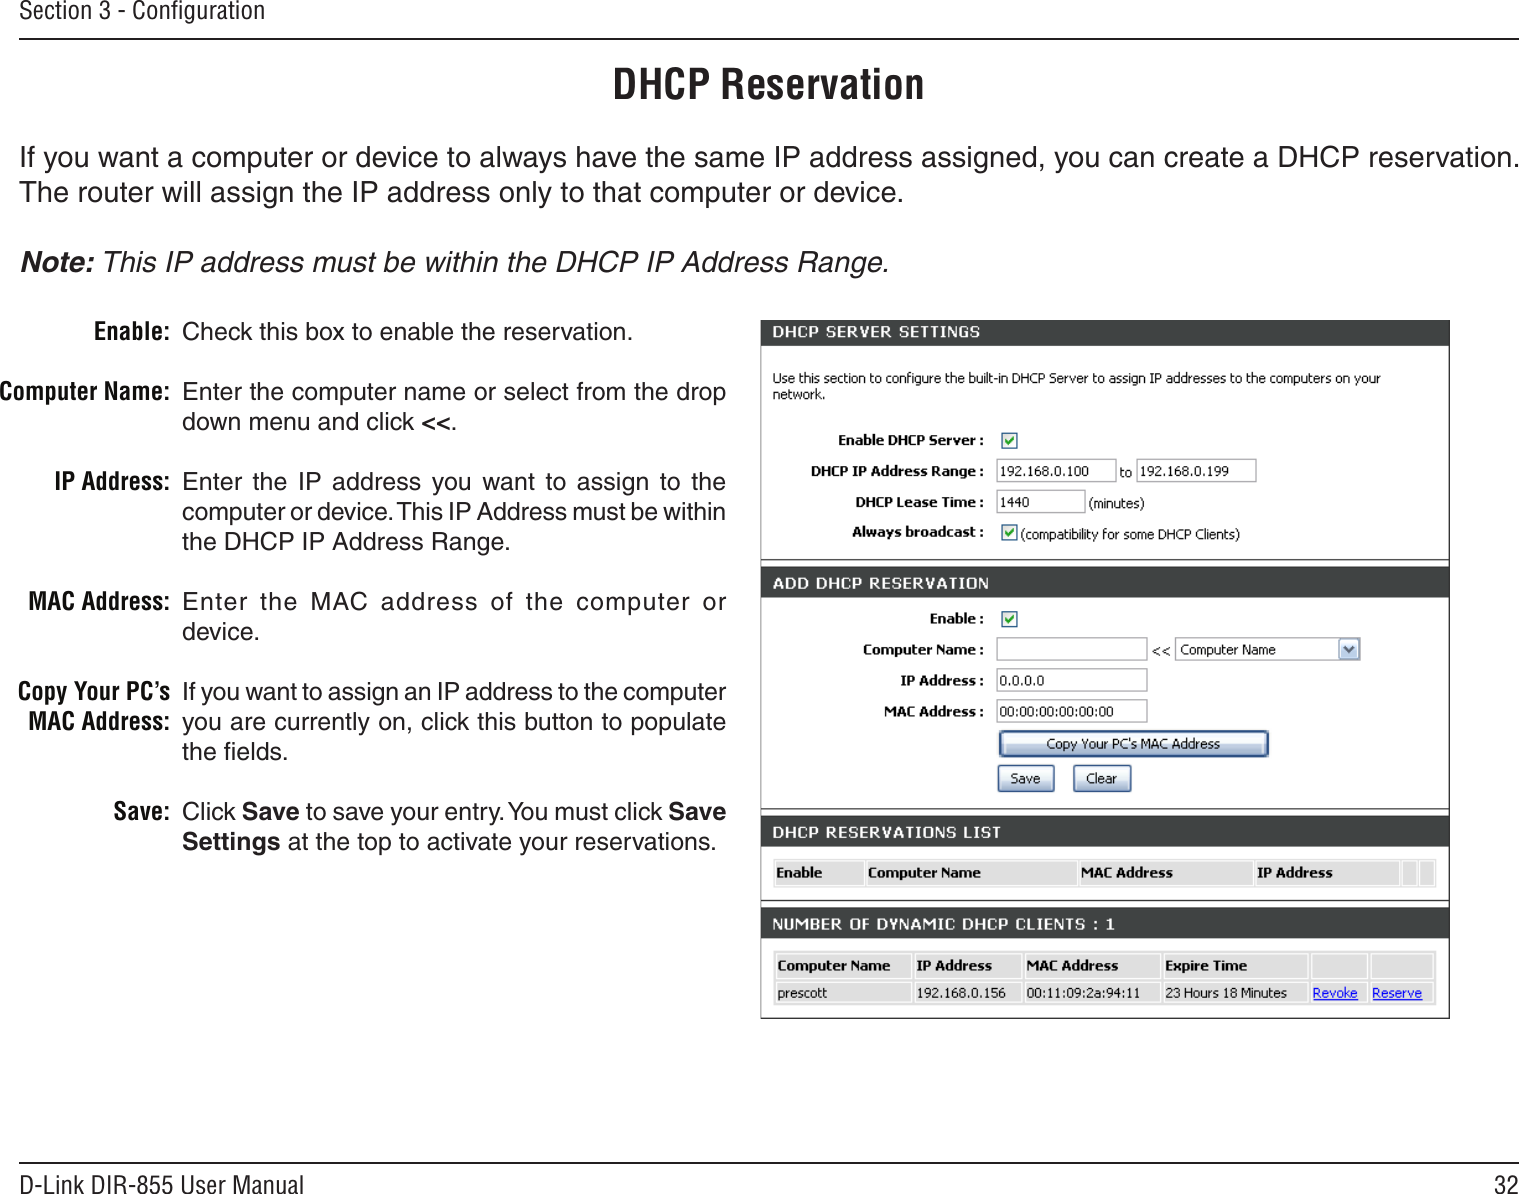 32D-Link DIR-855 User ManualSection 3 - ConﬁgurationDHCP ReservationIf you want a computer or device to always have the same IP address assigned, you can create a DHCP reservation. The router will assign the IP address only to that computer or device. Note: This IP address must be within the DHCP IP Address Range.Check this box to enable the reservation.Enter the computer name or select from the drop down menu and click &lt;&lt;.Enter  the  IP  address  you  want  to  assign  to  the computer or device. This IP Address must be within the DHCP IP Address Range.Enter  the  MAC  address  of  the  computer  or device.If you want to assign an IP address to the computer you are currently on, click this button to populate the ﬁelds. Click Save to save your entry. You must click Save Settings at the top to activate your reservations. Enable:Computer Name:IP Address:MAC Address:Copy Your PC’s MAC Address:Save: